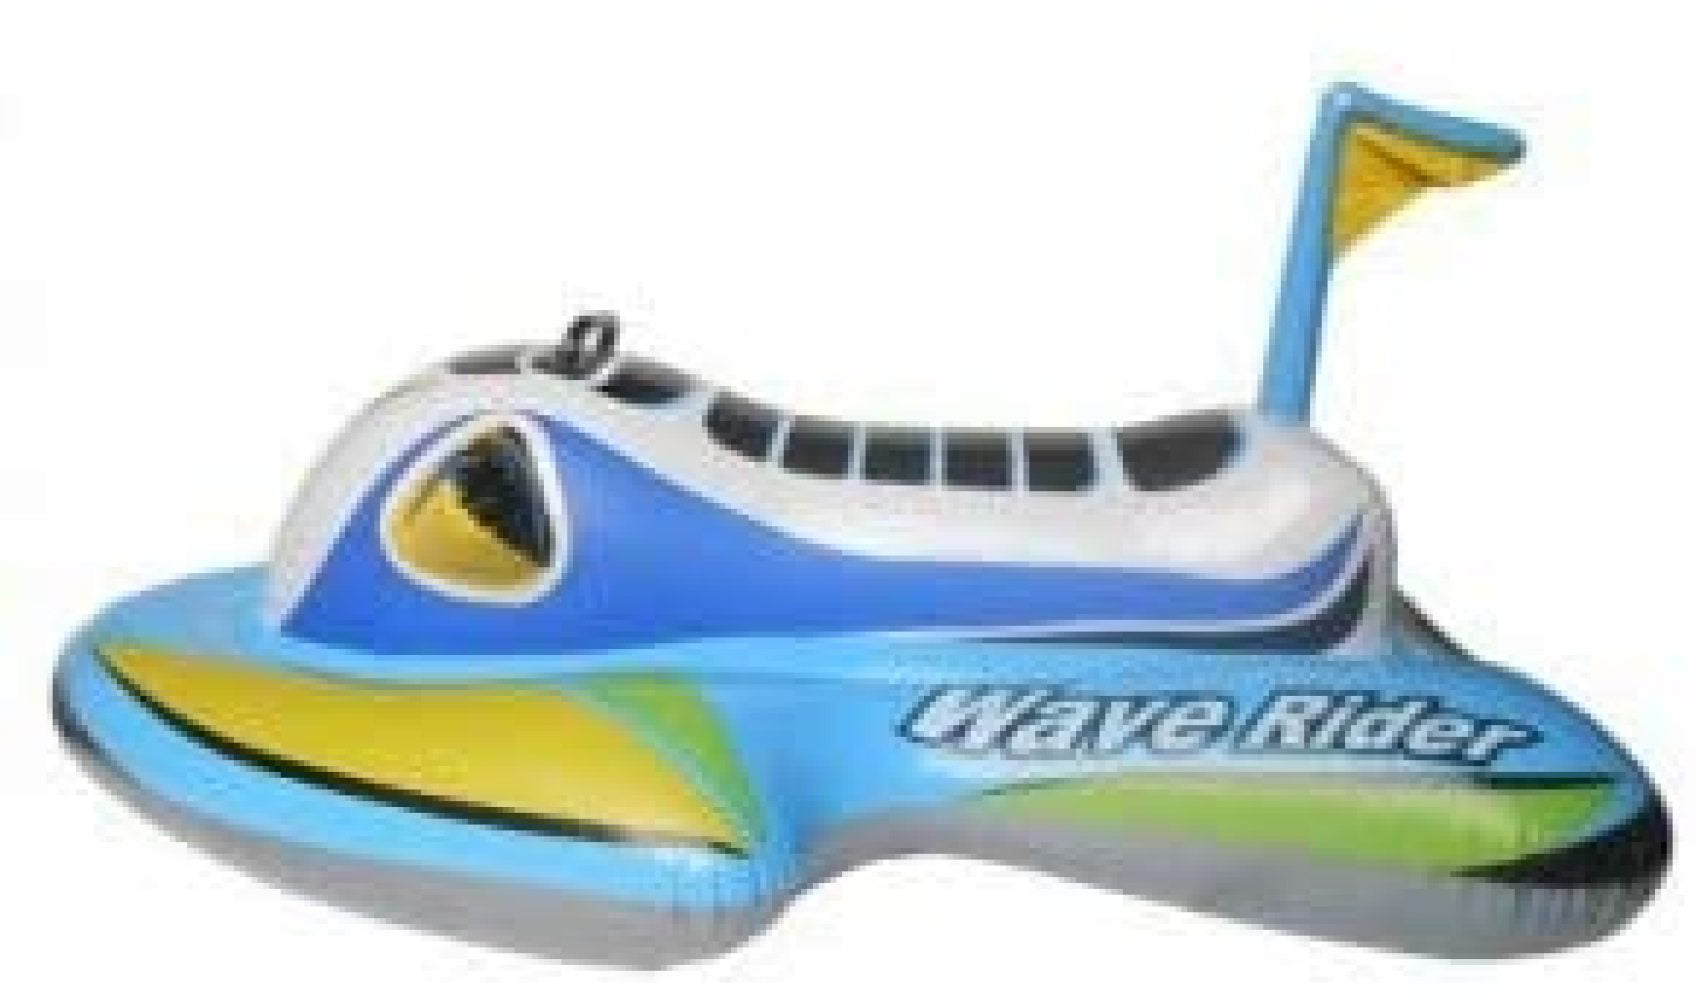 46" X 30.5" for Ages 3+ Intex Wave Rider Ride-On 